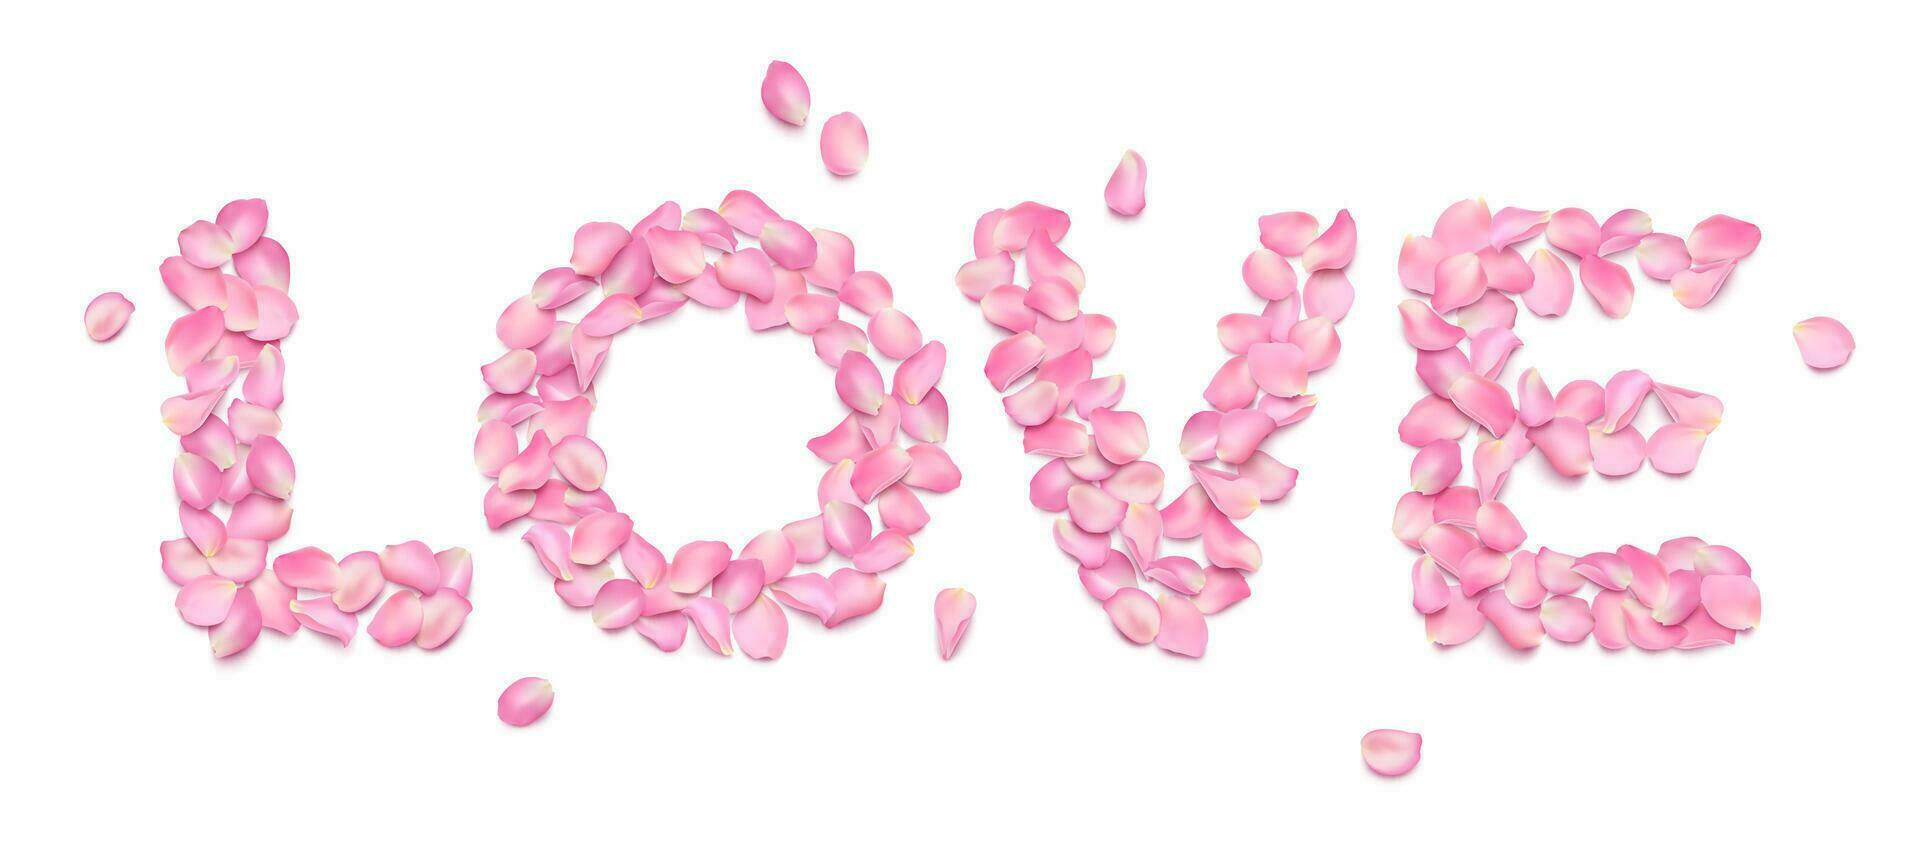 LOVE typography from realistic rose petals isolated on white background. Pink voluminous sakura petals. Romantic inscription for greeting card Valentine's Day, March 8, wedding invitation. vector